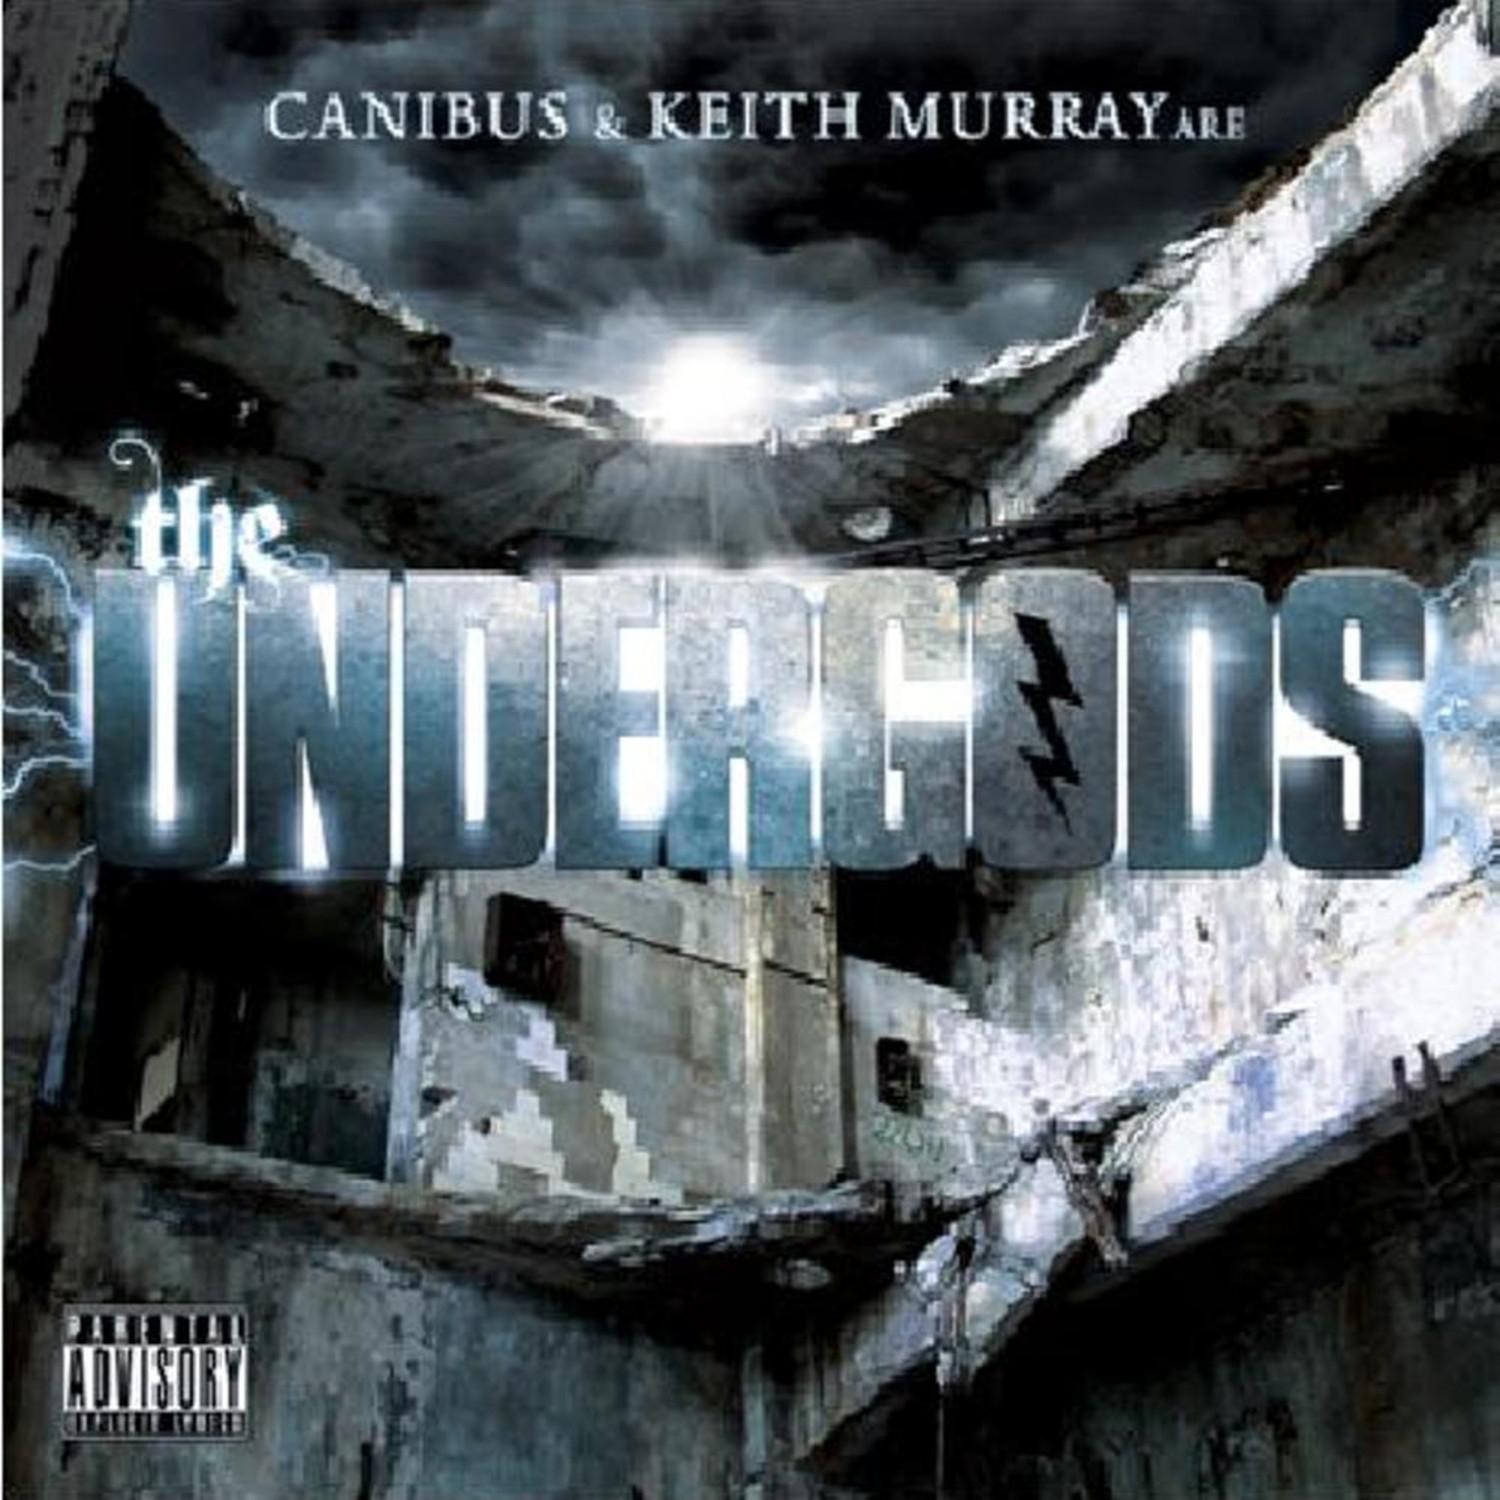 Canibus and Keith Murray are The Undergods